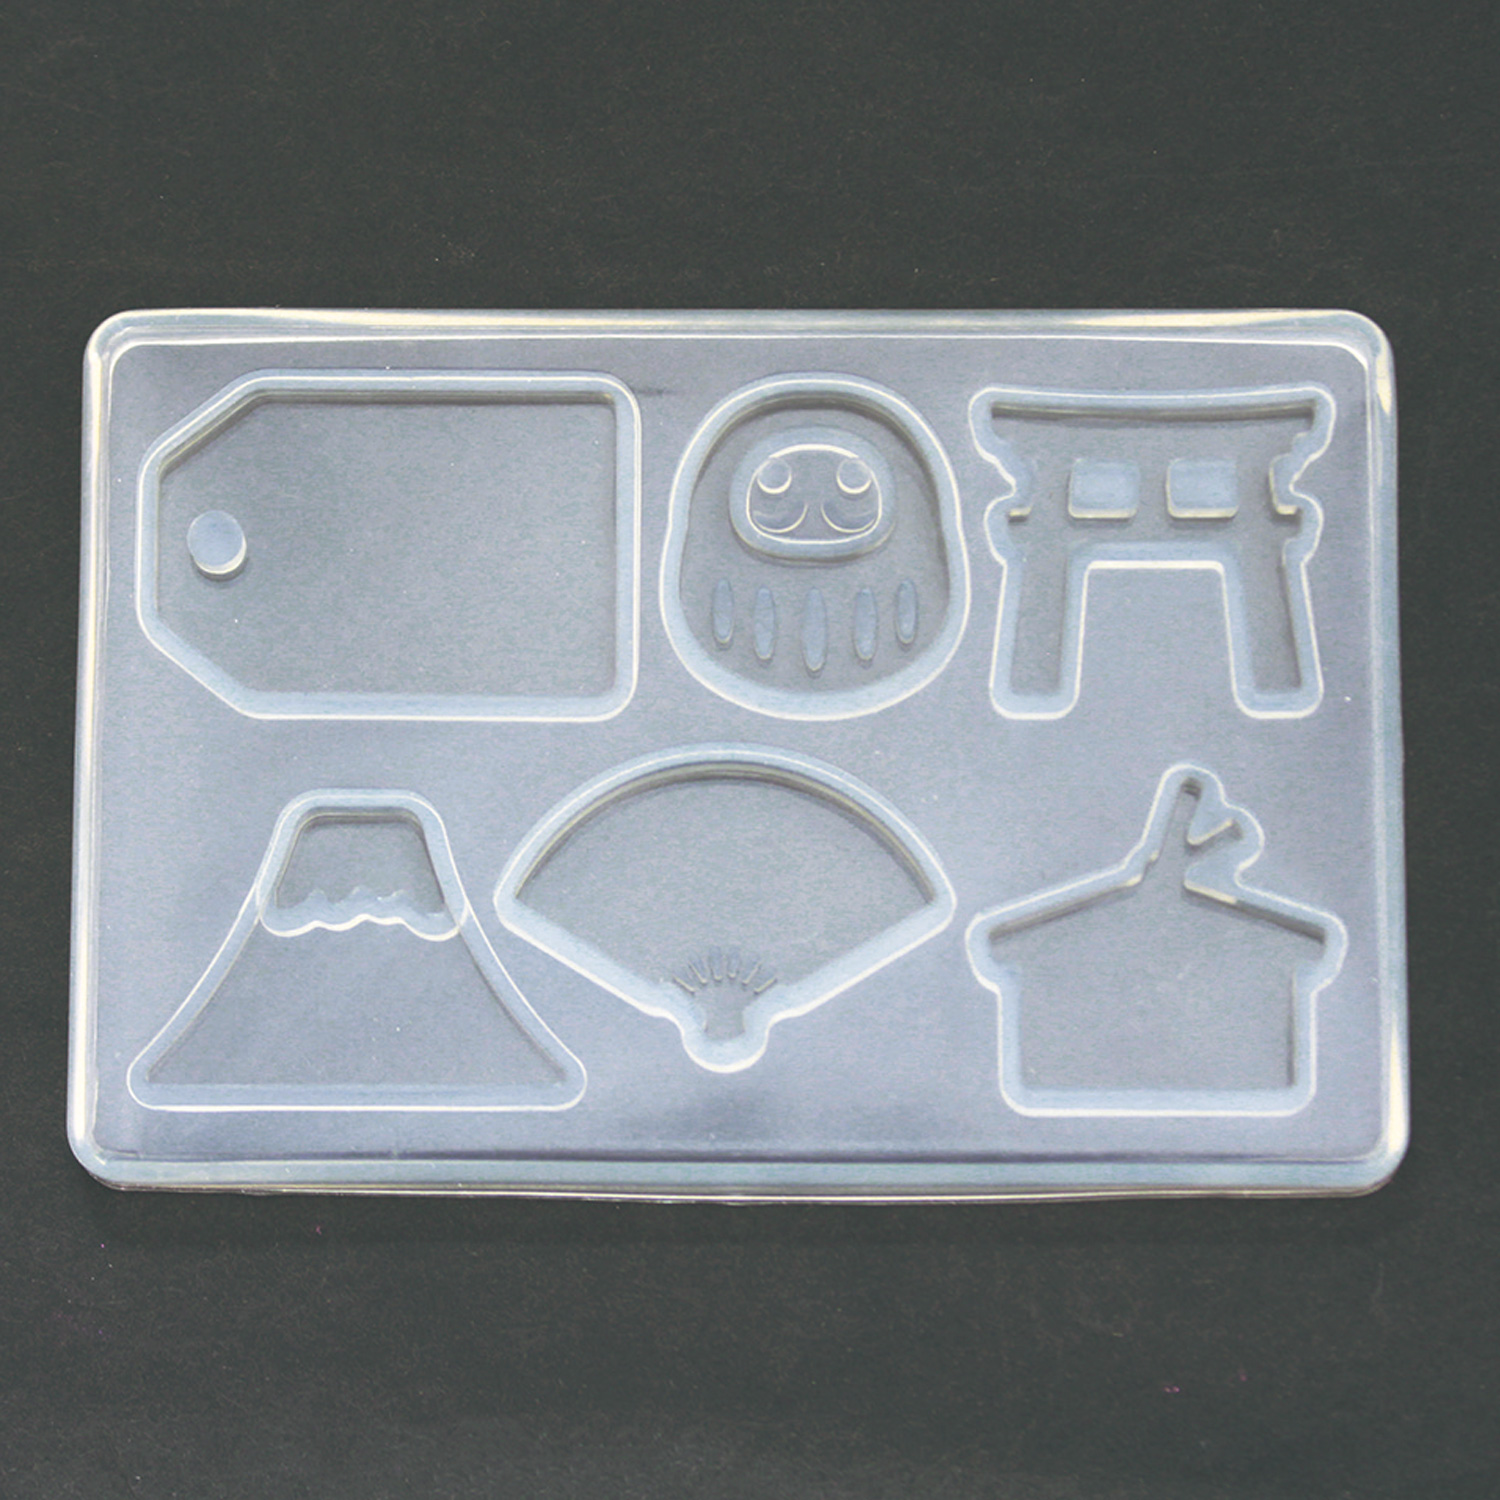 T10-1730　Silicone Mold , Japanese Good Luch Motifs　1pcs　(pcs)